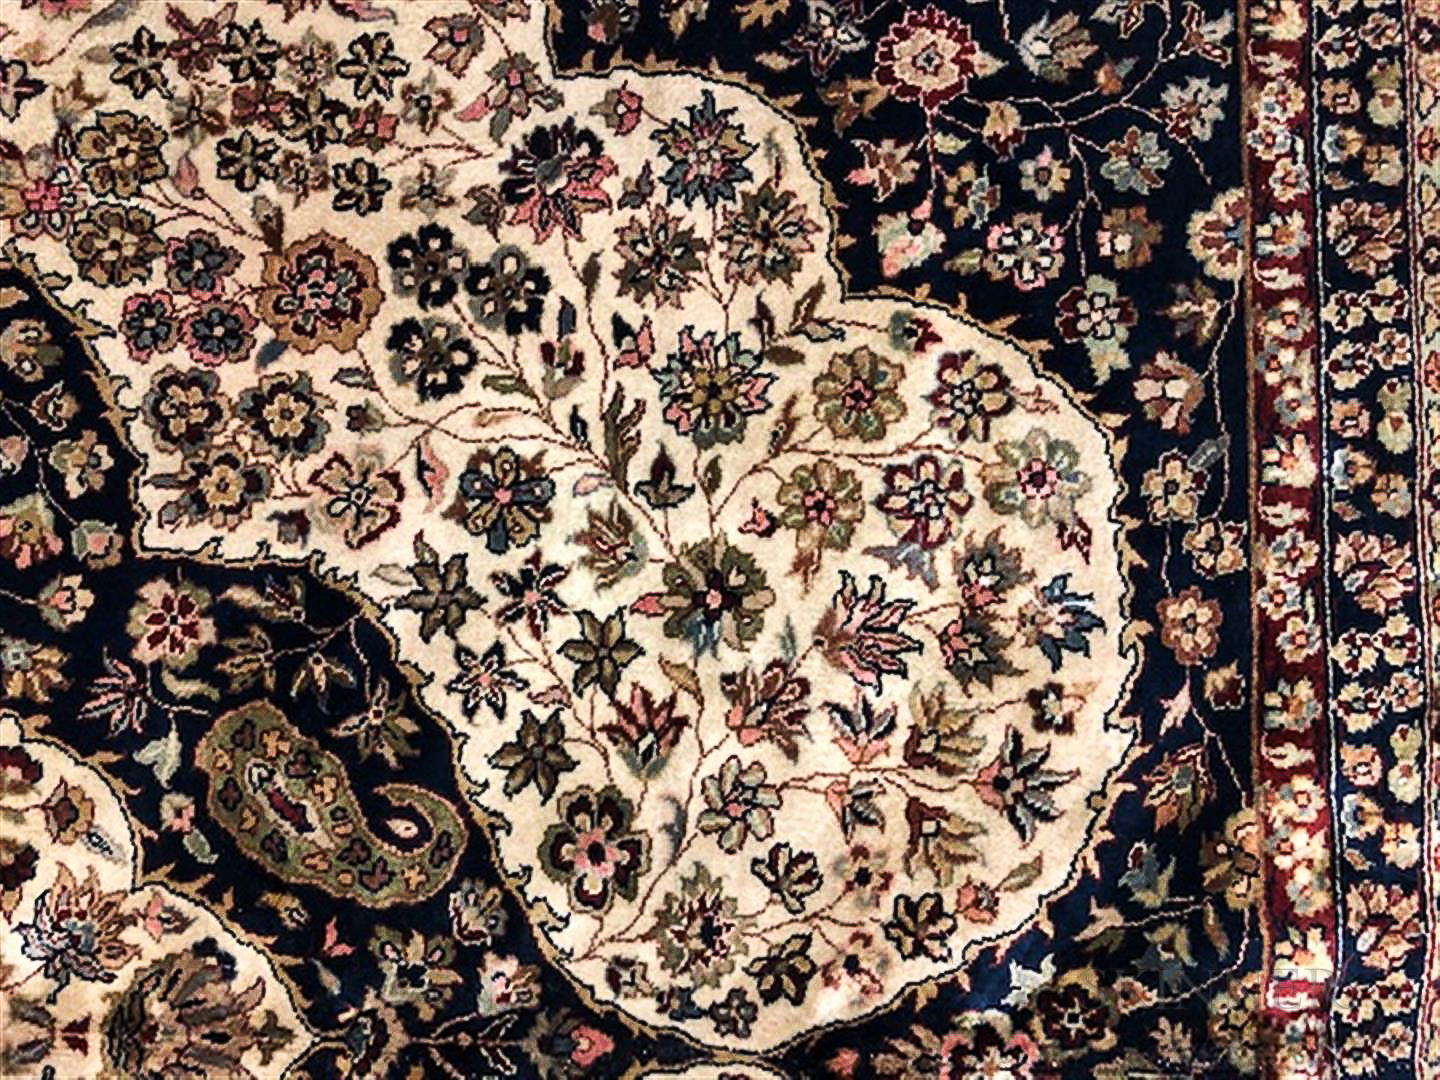 Tabriz Carpet, Iran, c. 1980, featuring stylized tendrils, leaves, and blossoms on a dark blue field - Image 2 of 3